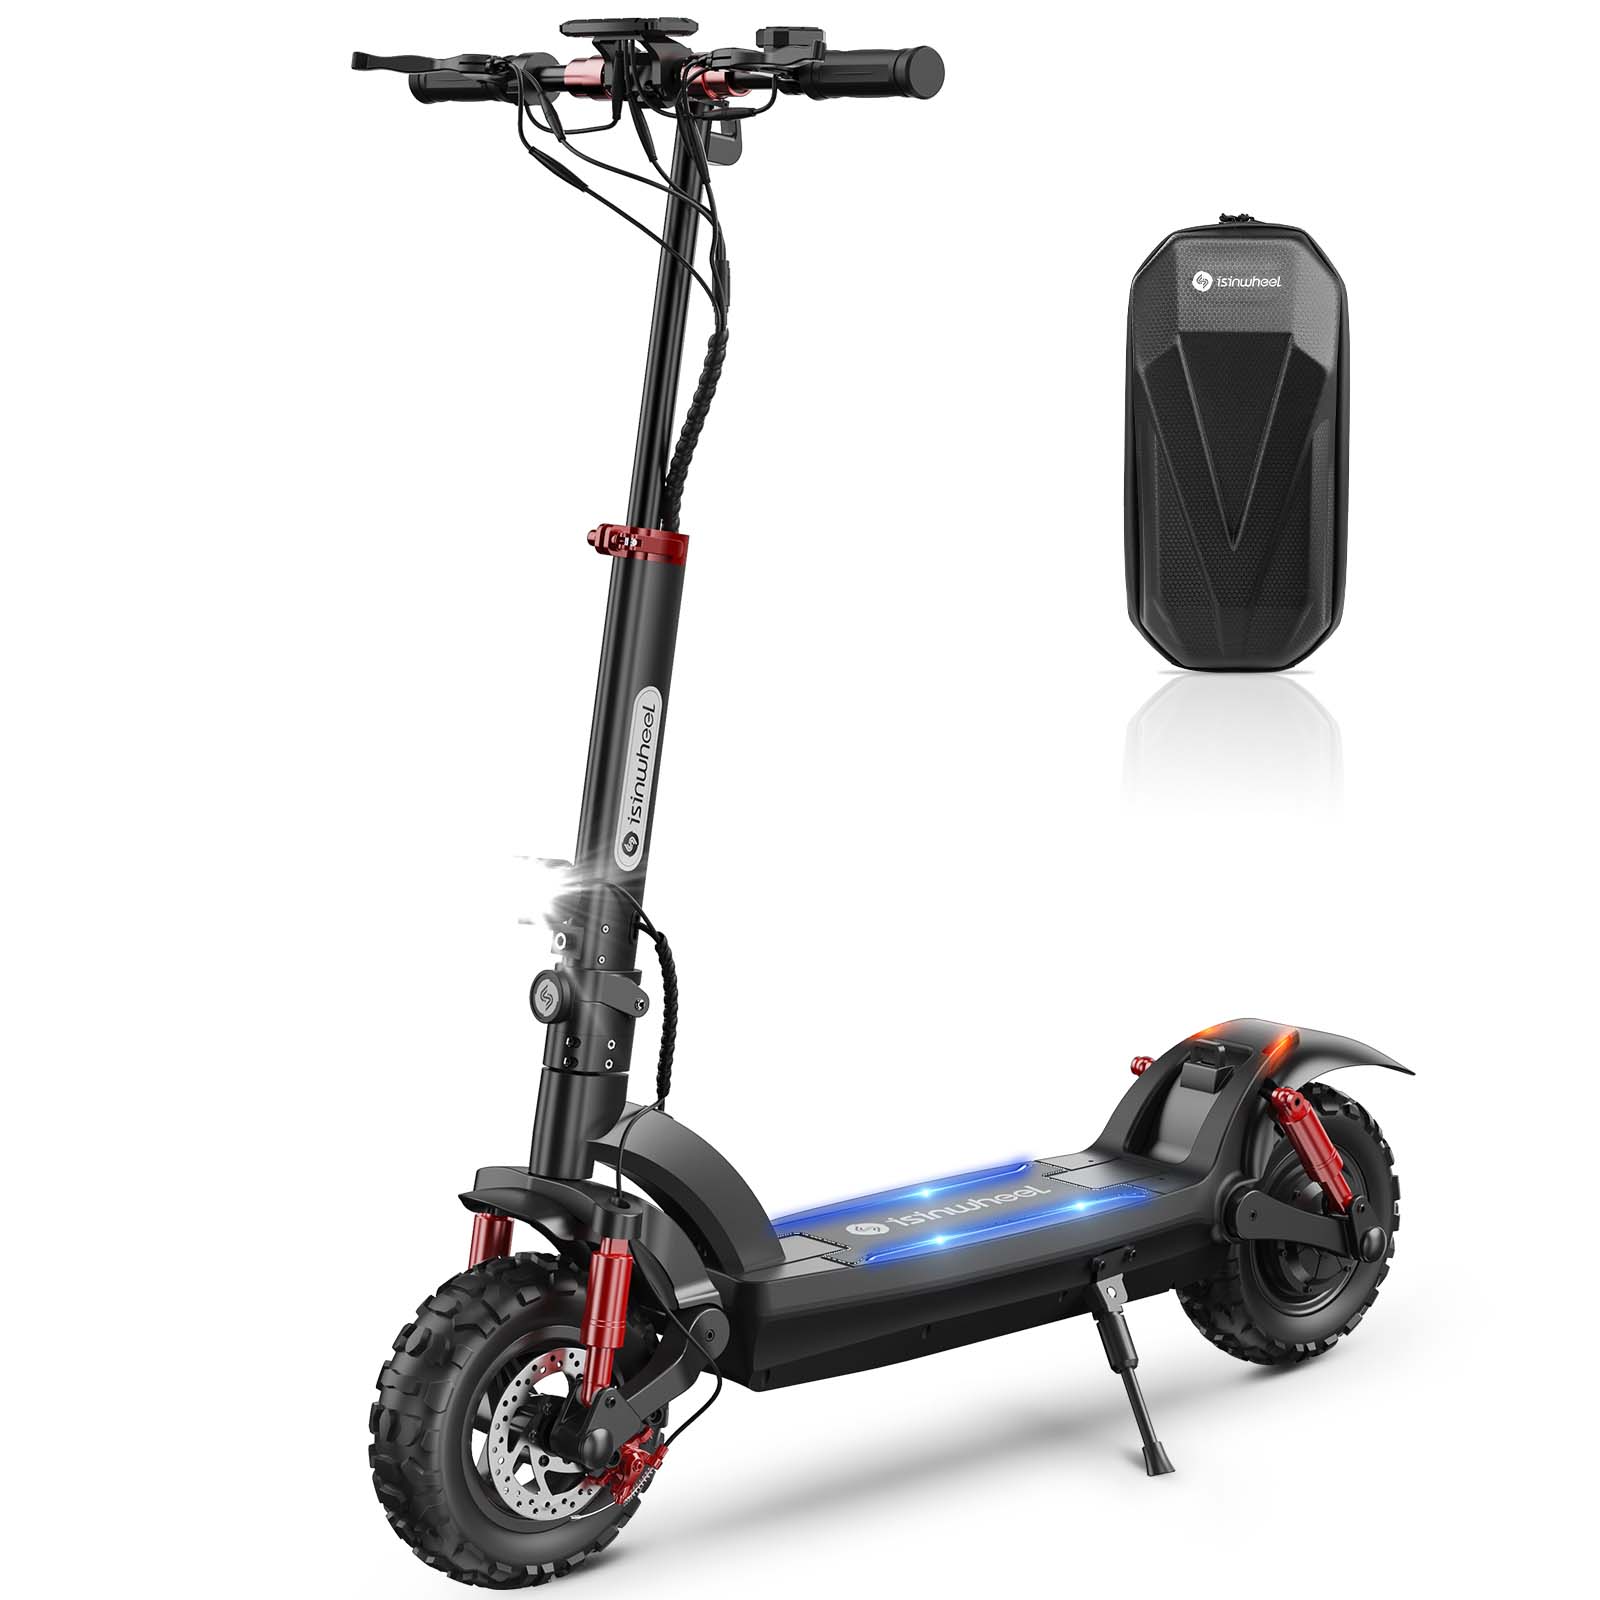 Ride Safe, Fun, and Comfortable with Dragon Scooters GTR-V2 🛴 Get you